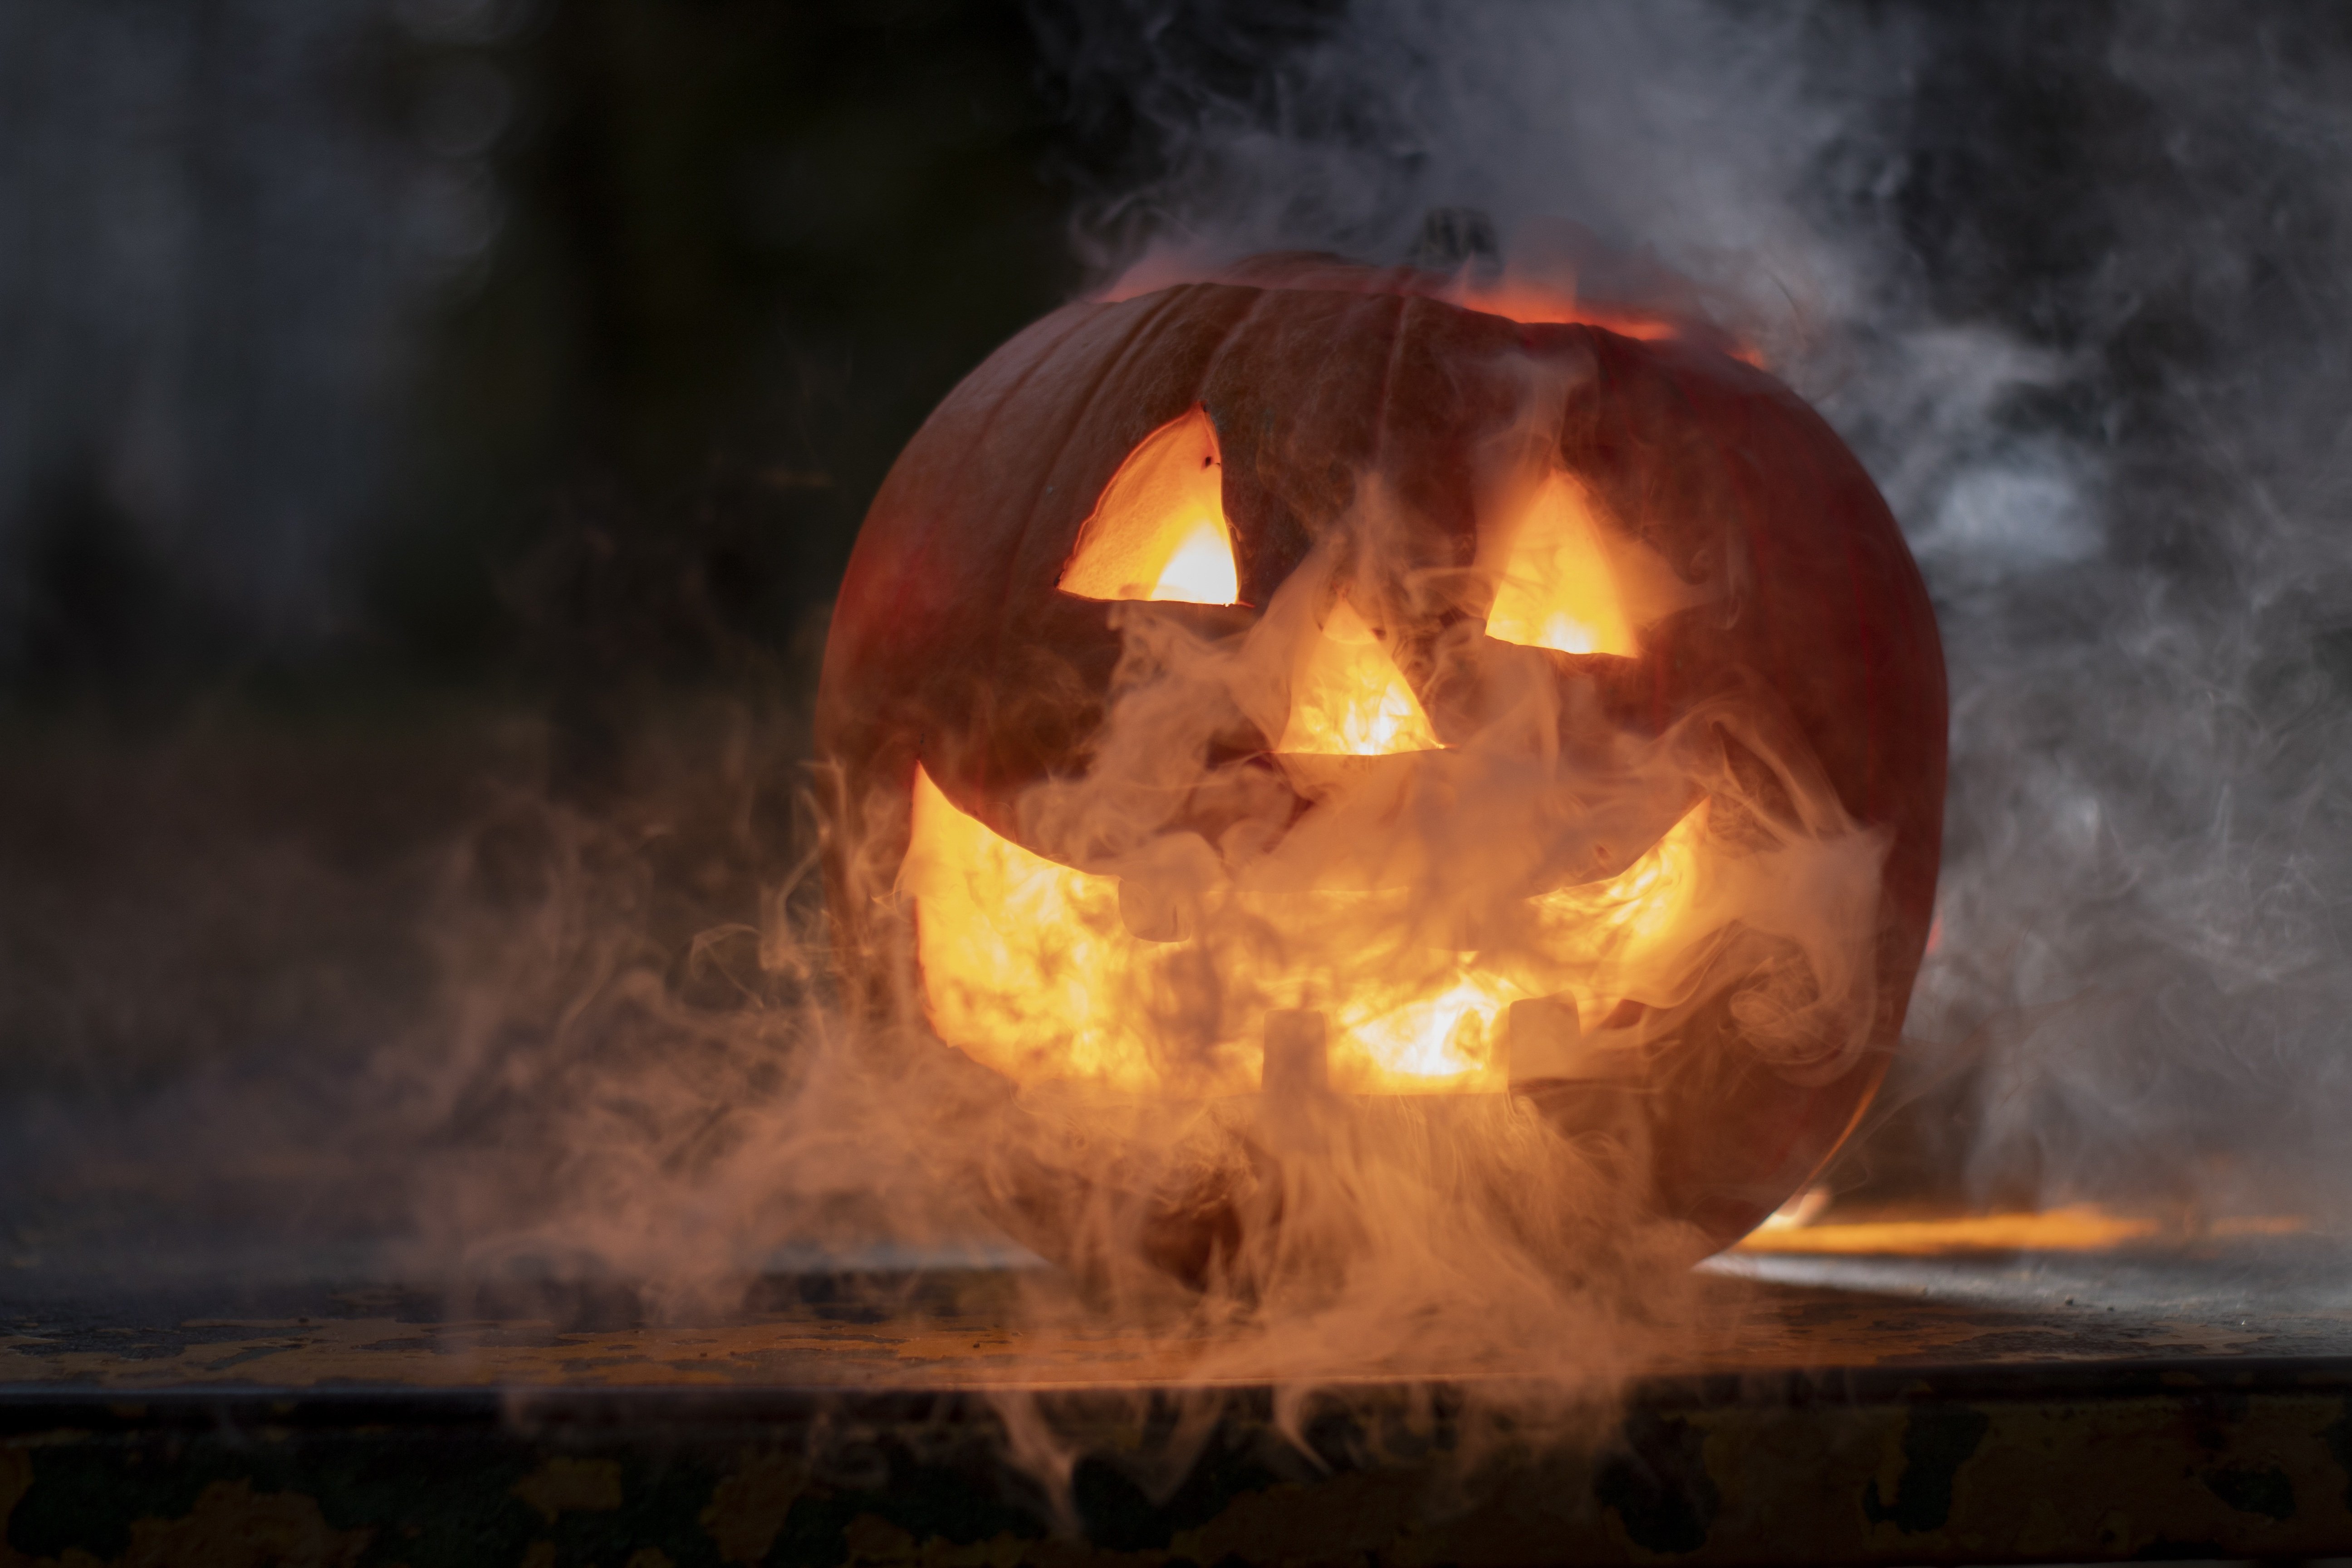 Halloween 4K wallpapers for your desktop or mobile screen free and easy to download